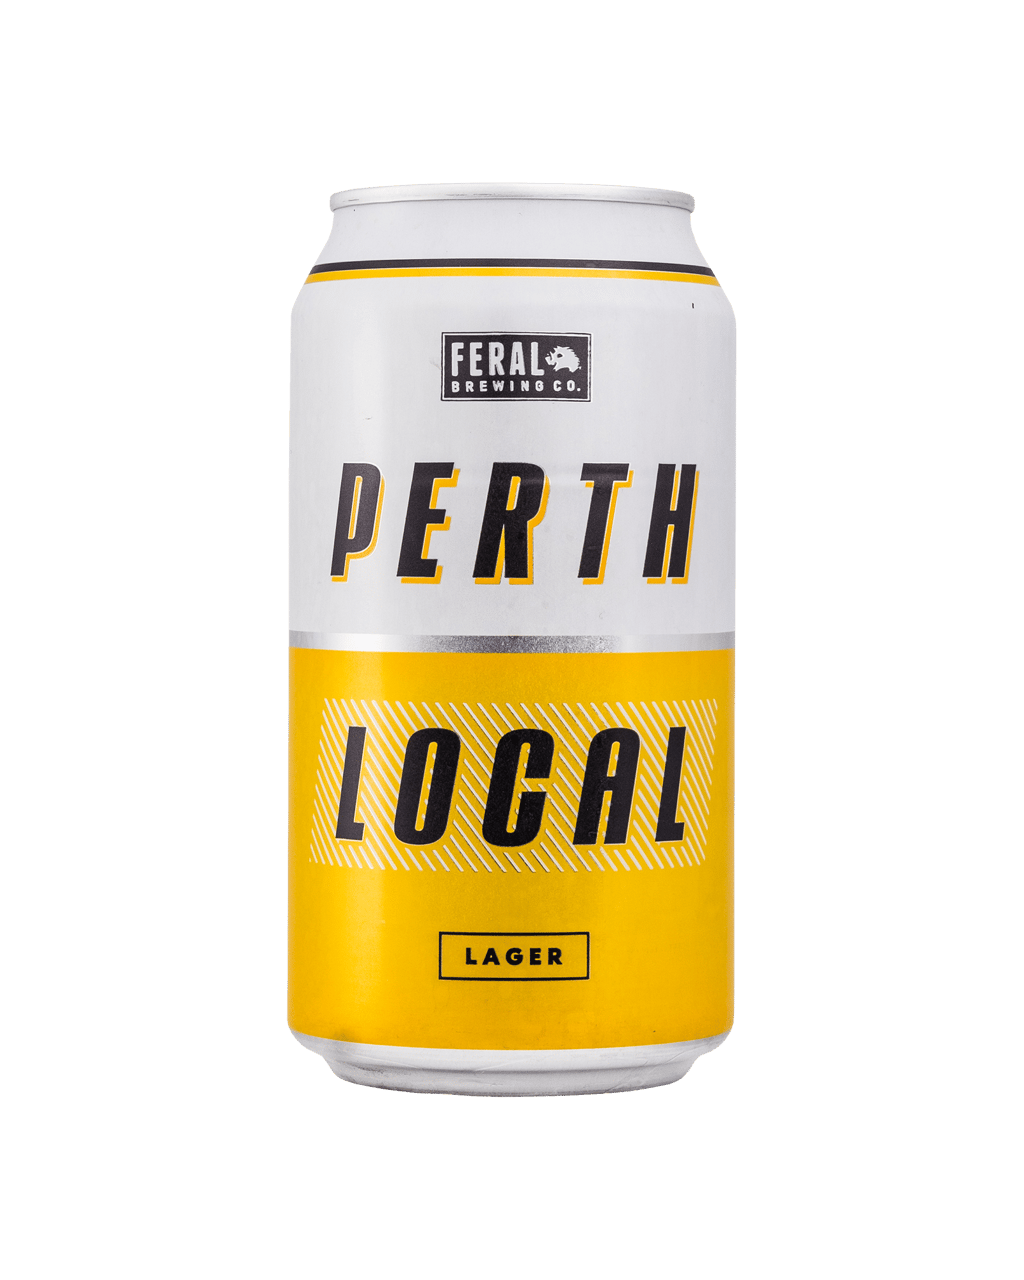 Feral Brewing Co. Perth Local Lager Cans 375ml (Unbeatable Prices